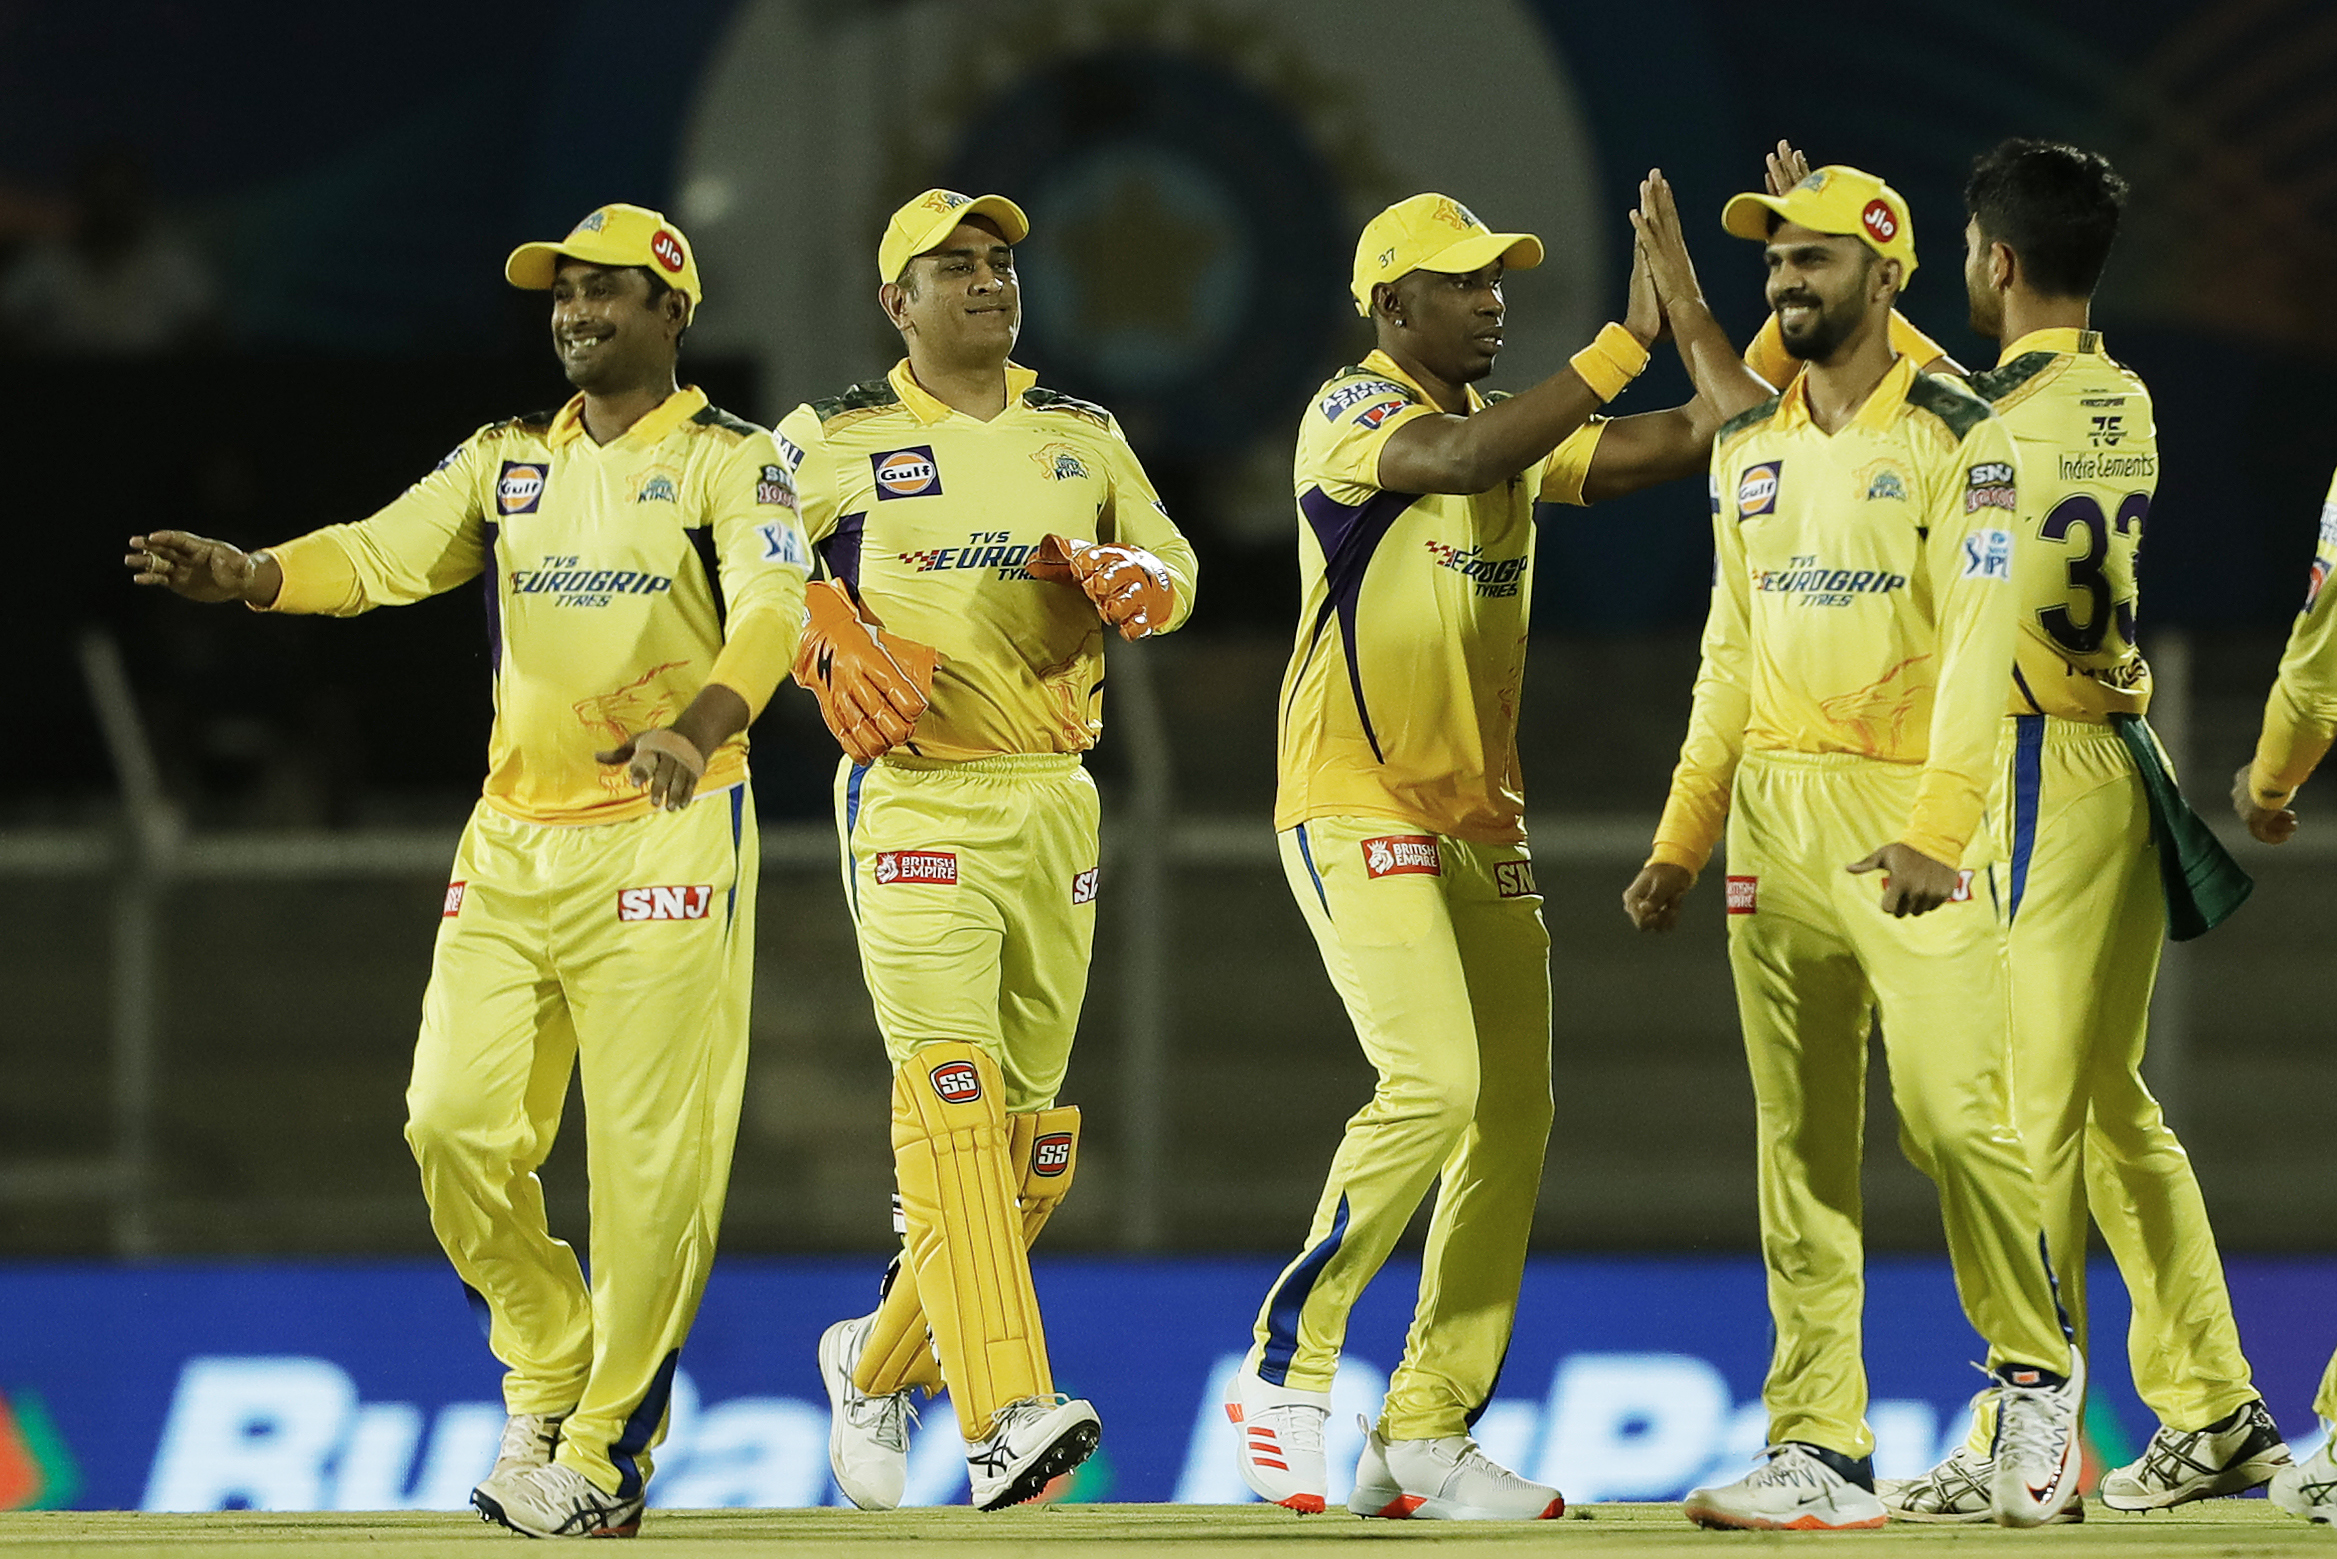 IPL 2022 | Very difficult to see Chennai Super Kings in the top 4 if they lose one more match, says RP Singh